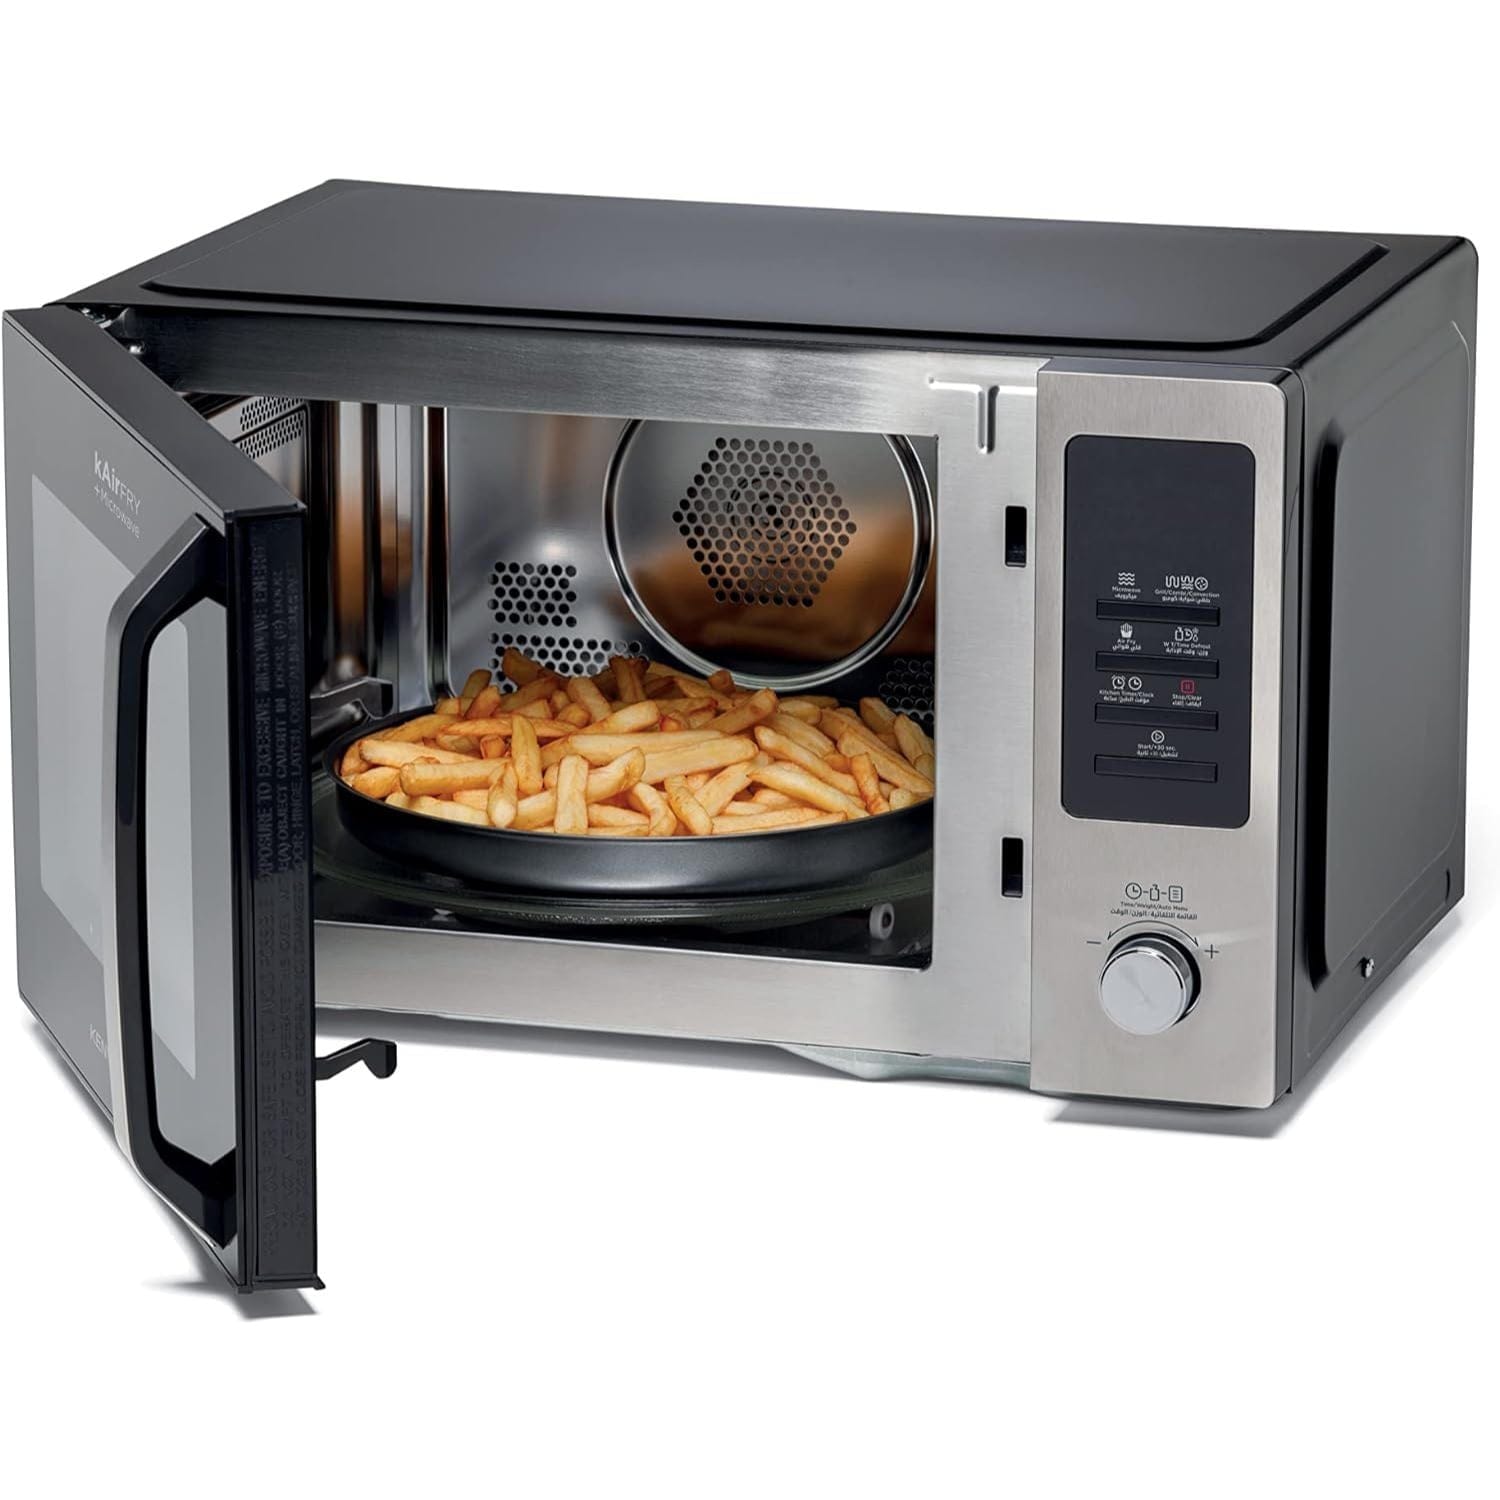 Kenwood Airfry Microwave with Grill 30L